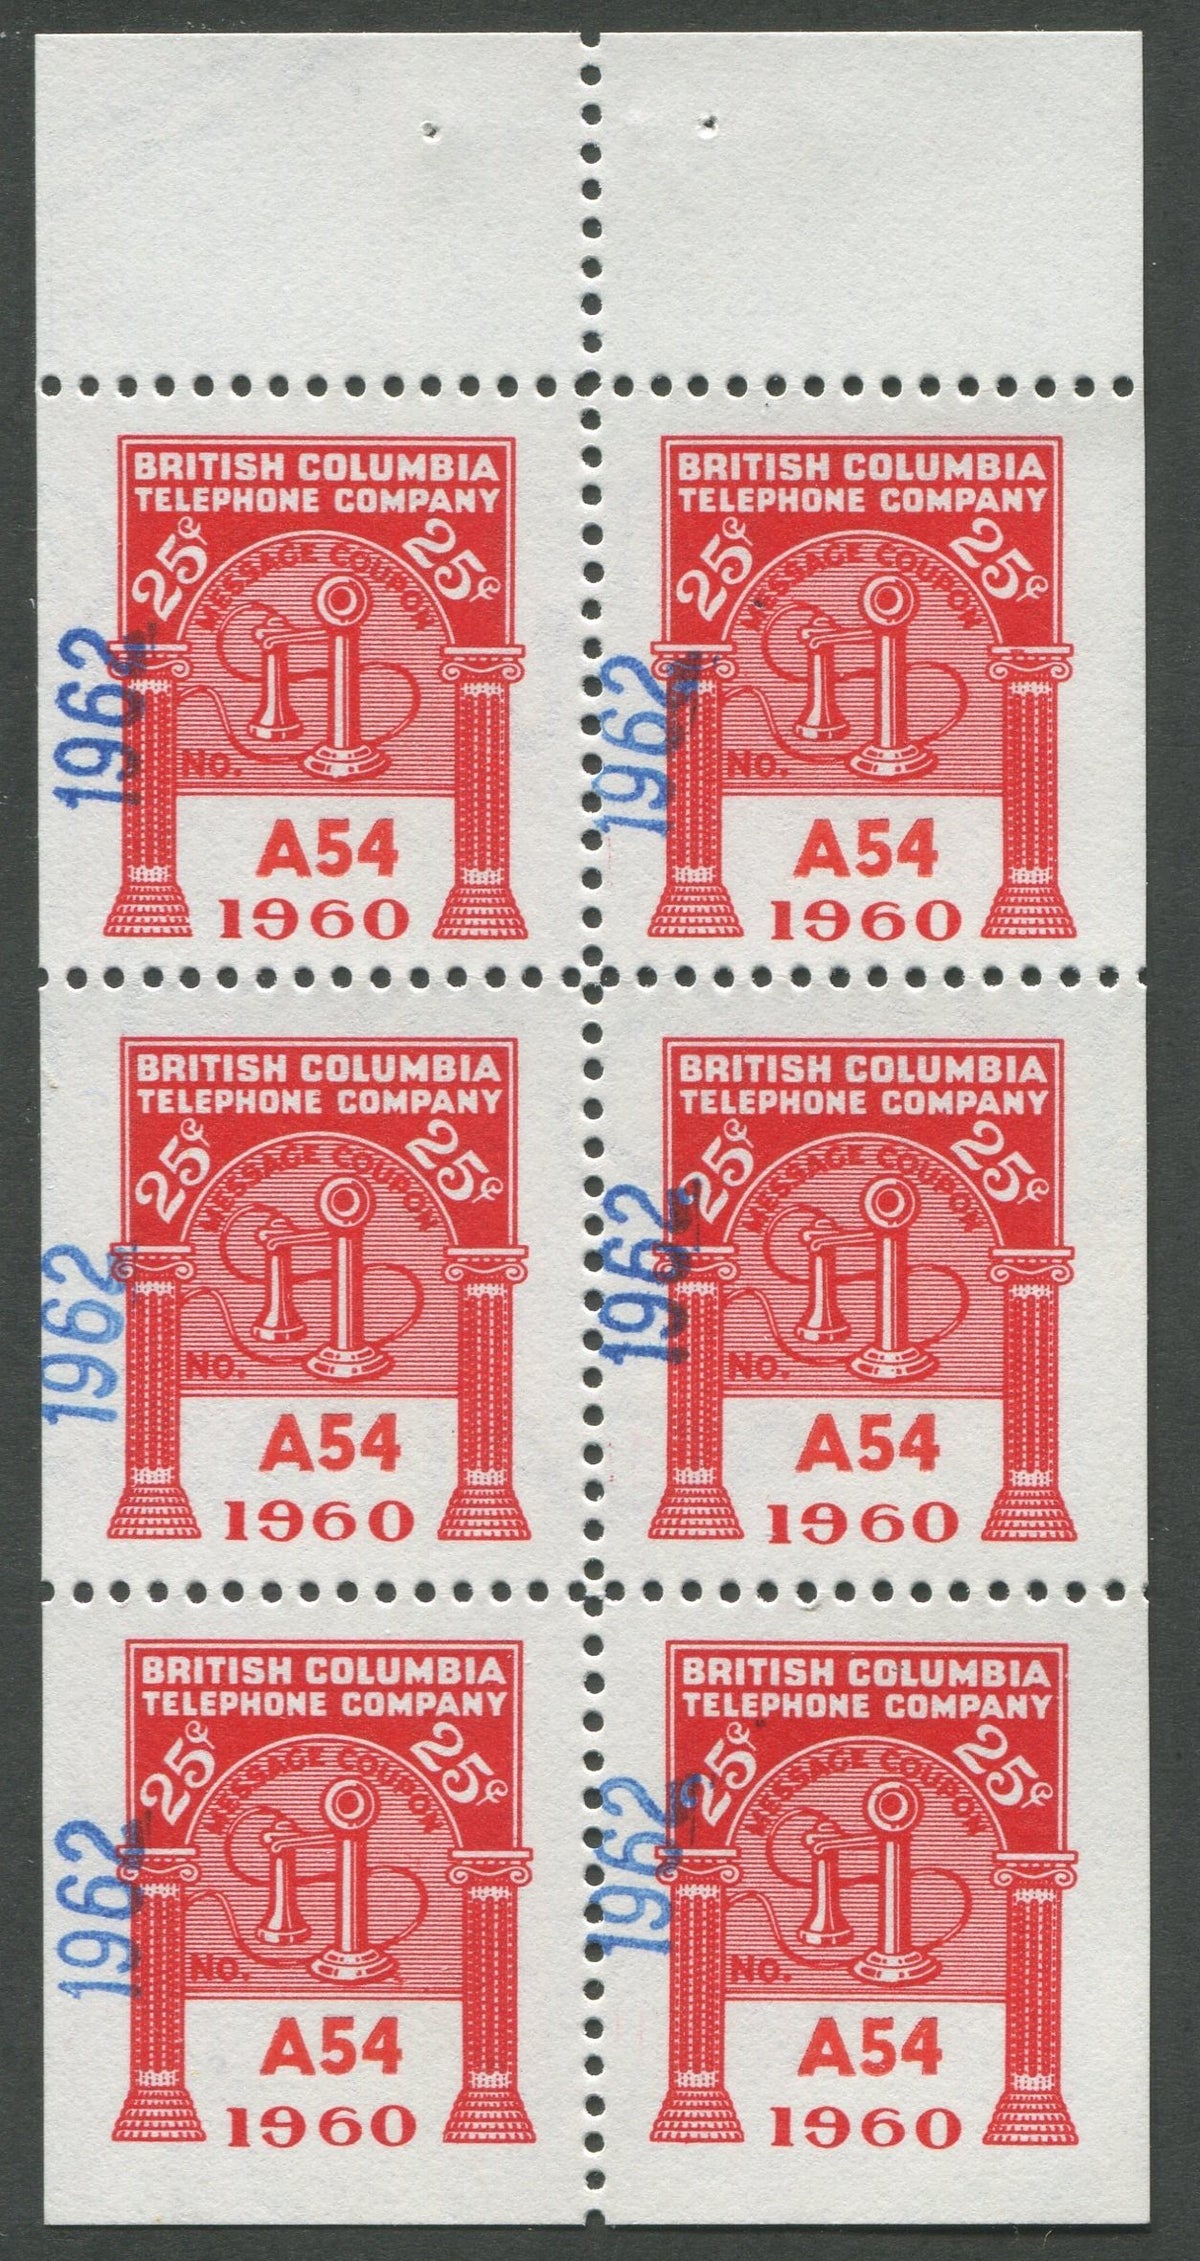 0295BC1708 - BCT197 - Mint Booklet Pane, Watermarked